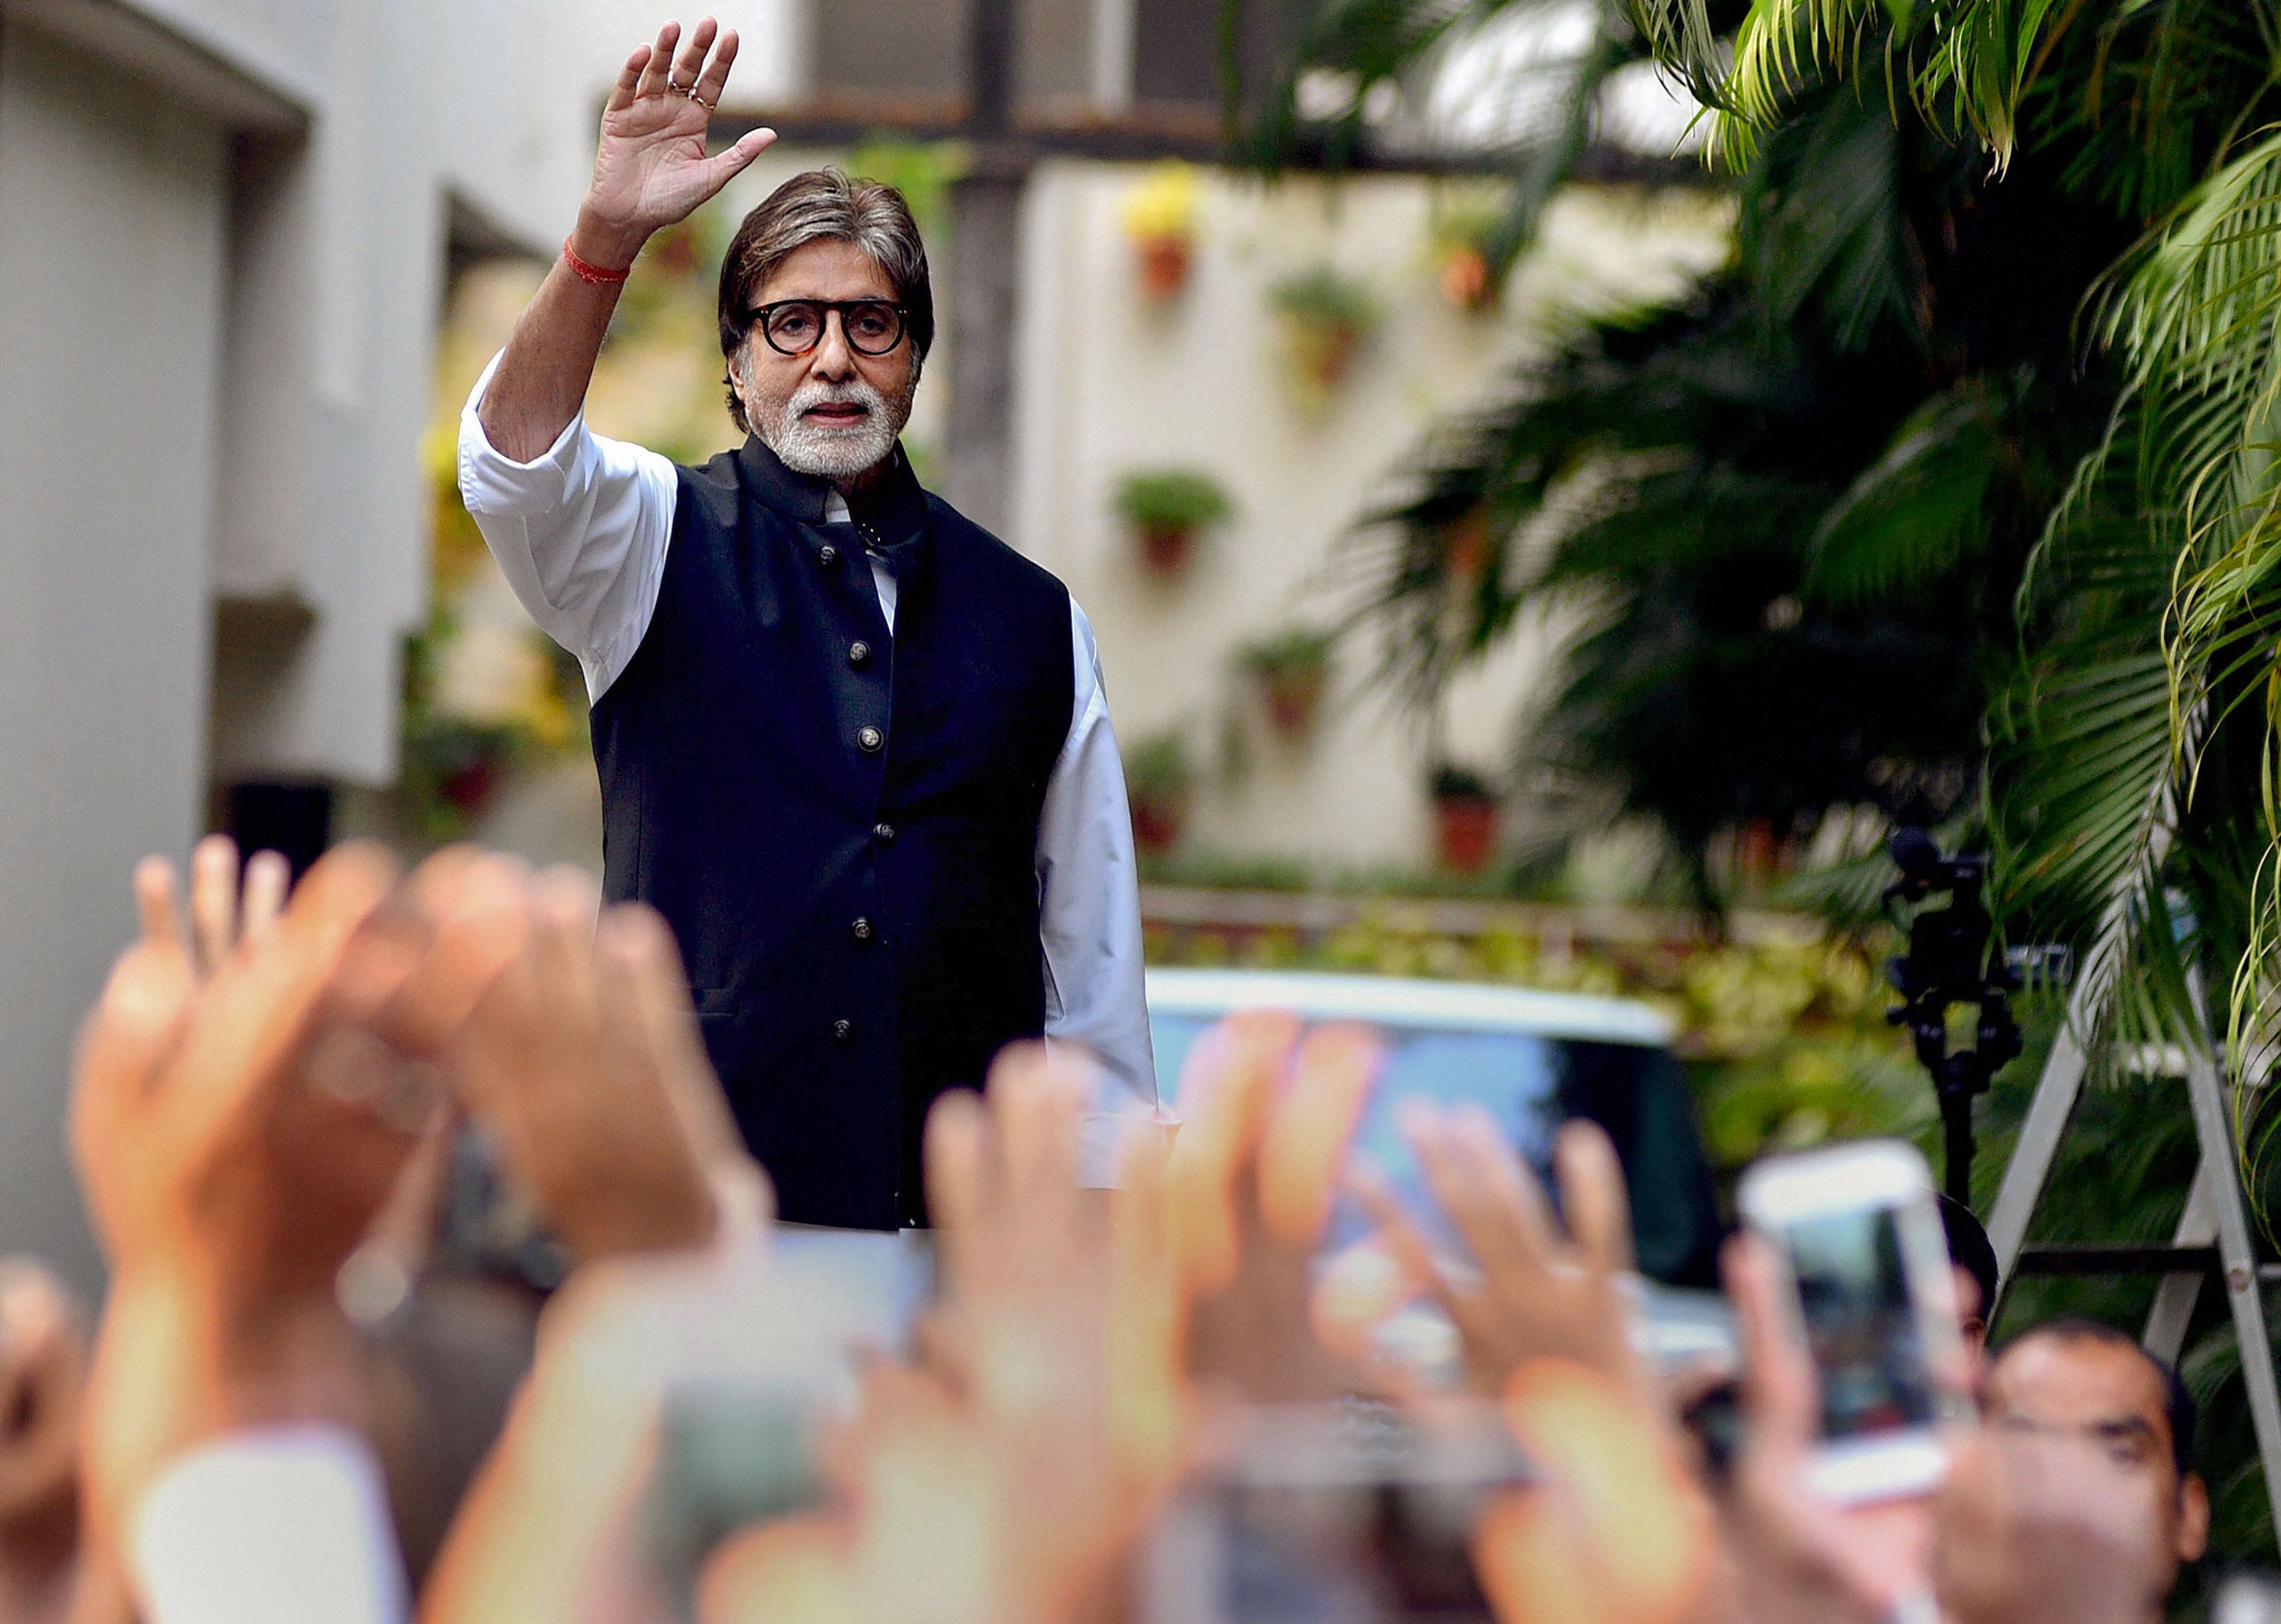 Amitabh bachchan tested positive for Covid-19 and was admitted to the hospital on Saturday. Credit: PTI